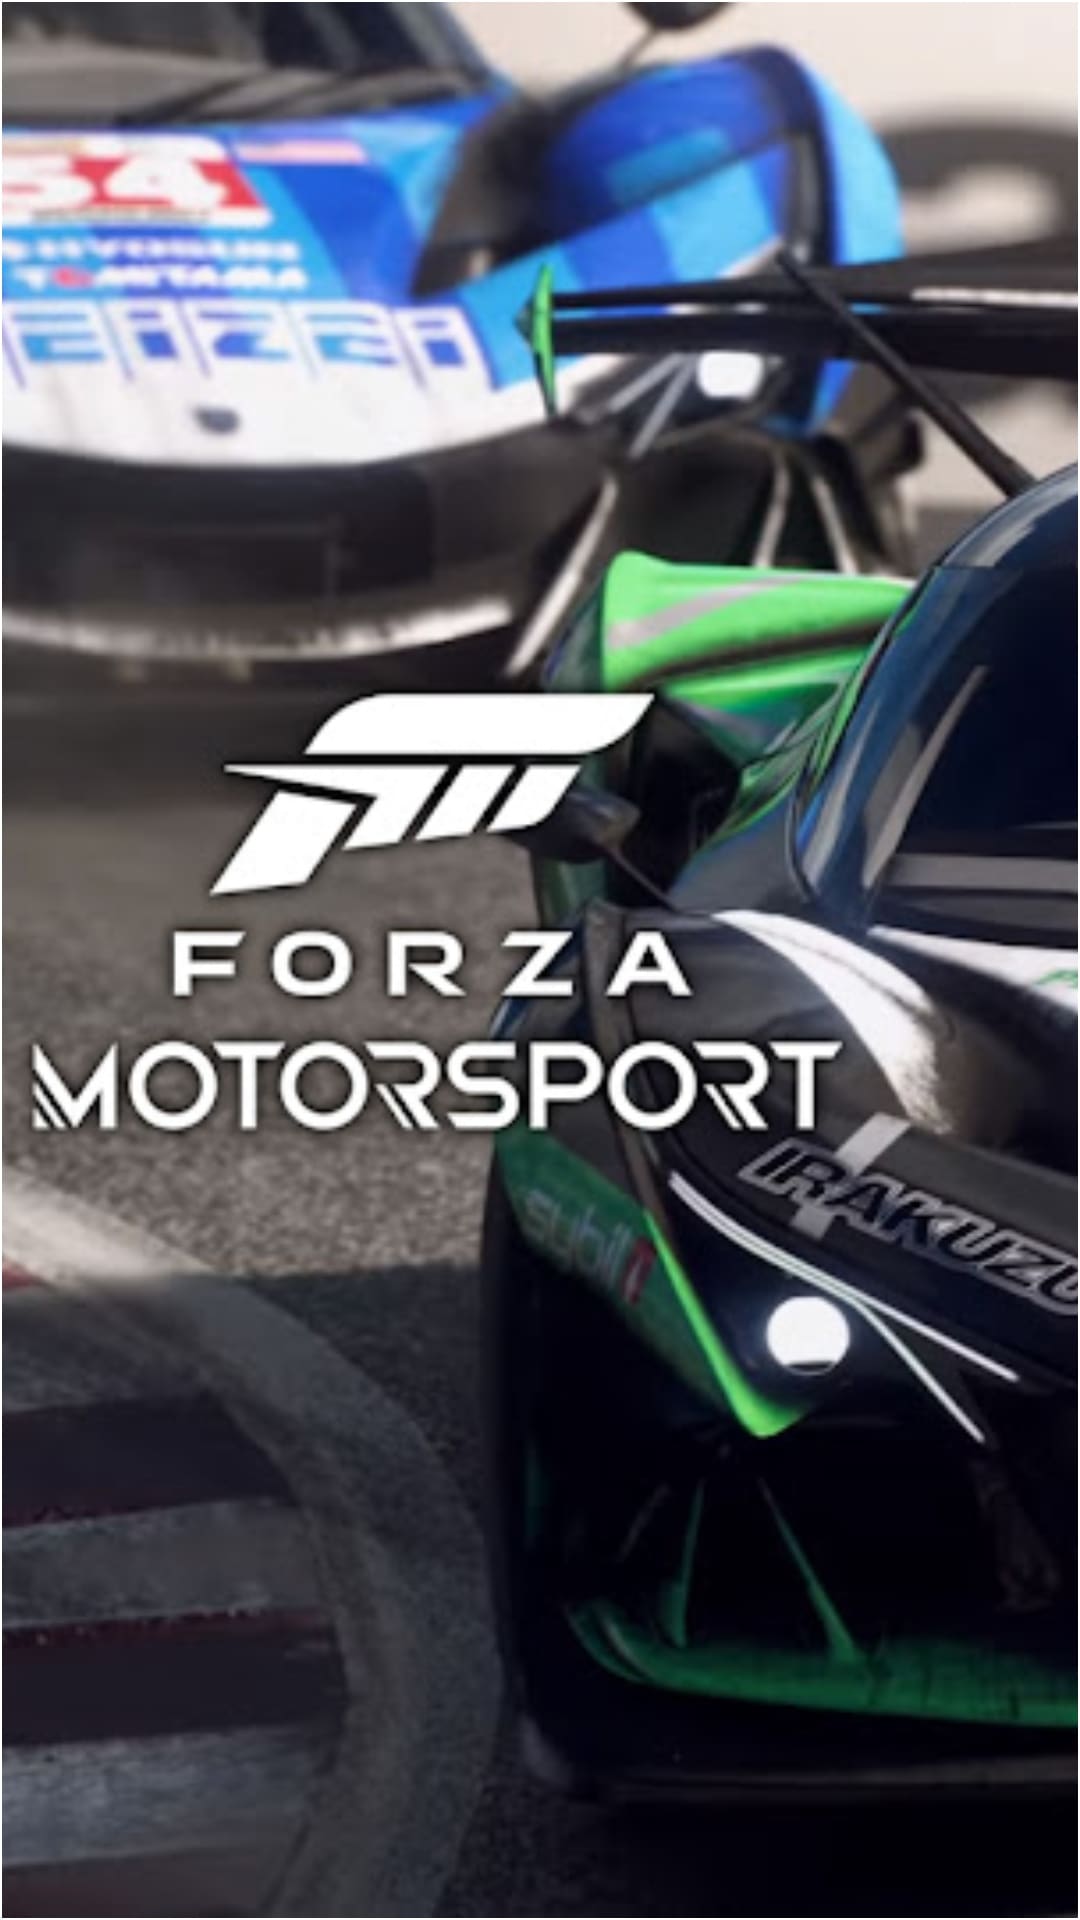 Microsoft releases new details for upcoming Forza Motorsport